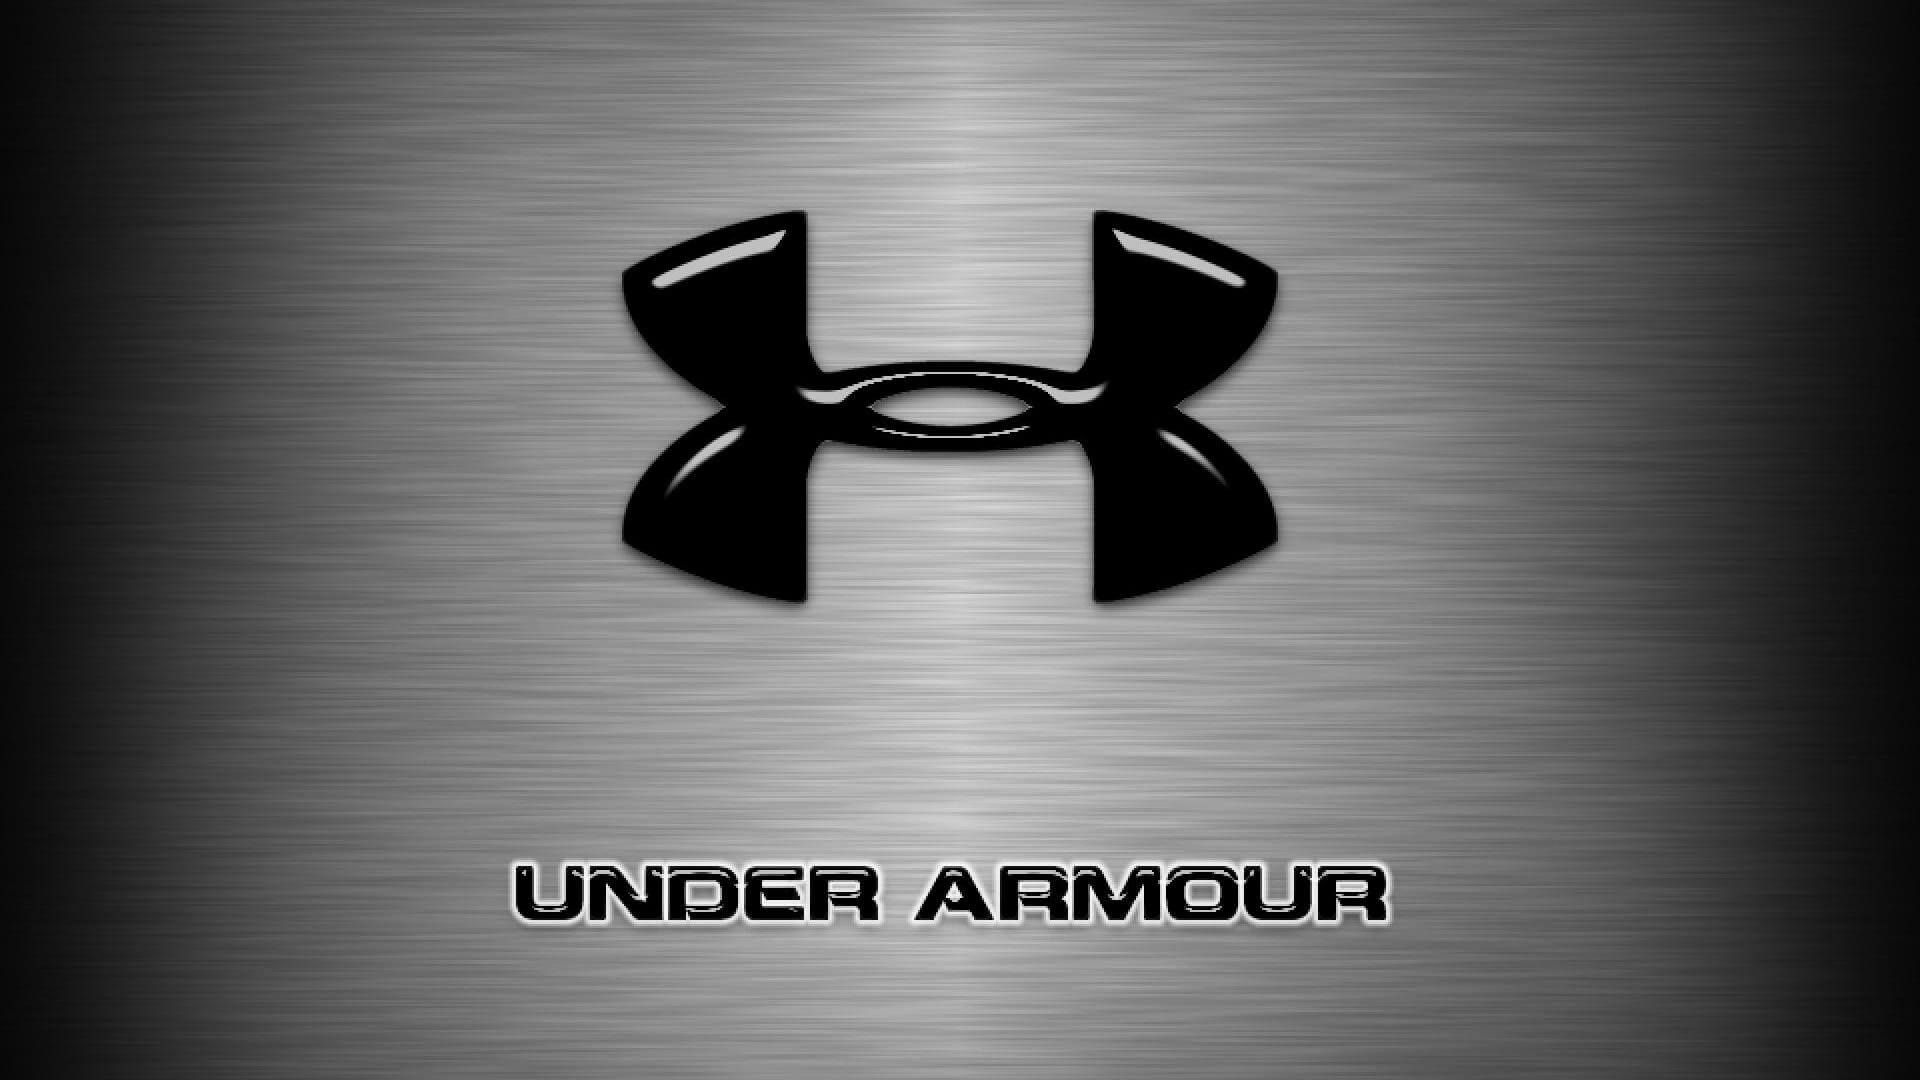 Cool Under Armour Basketball Logo - Under Armour Wallpapers - Wallpaper Cave